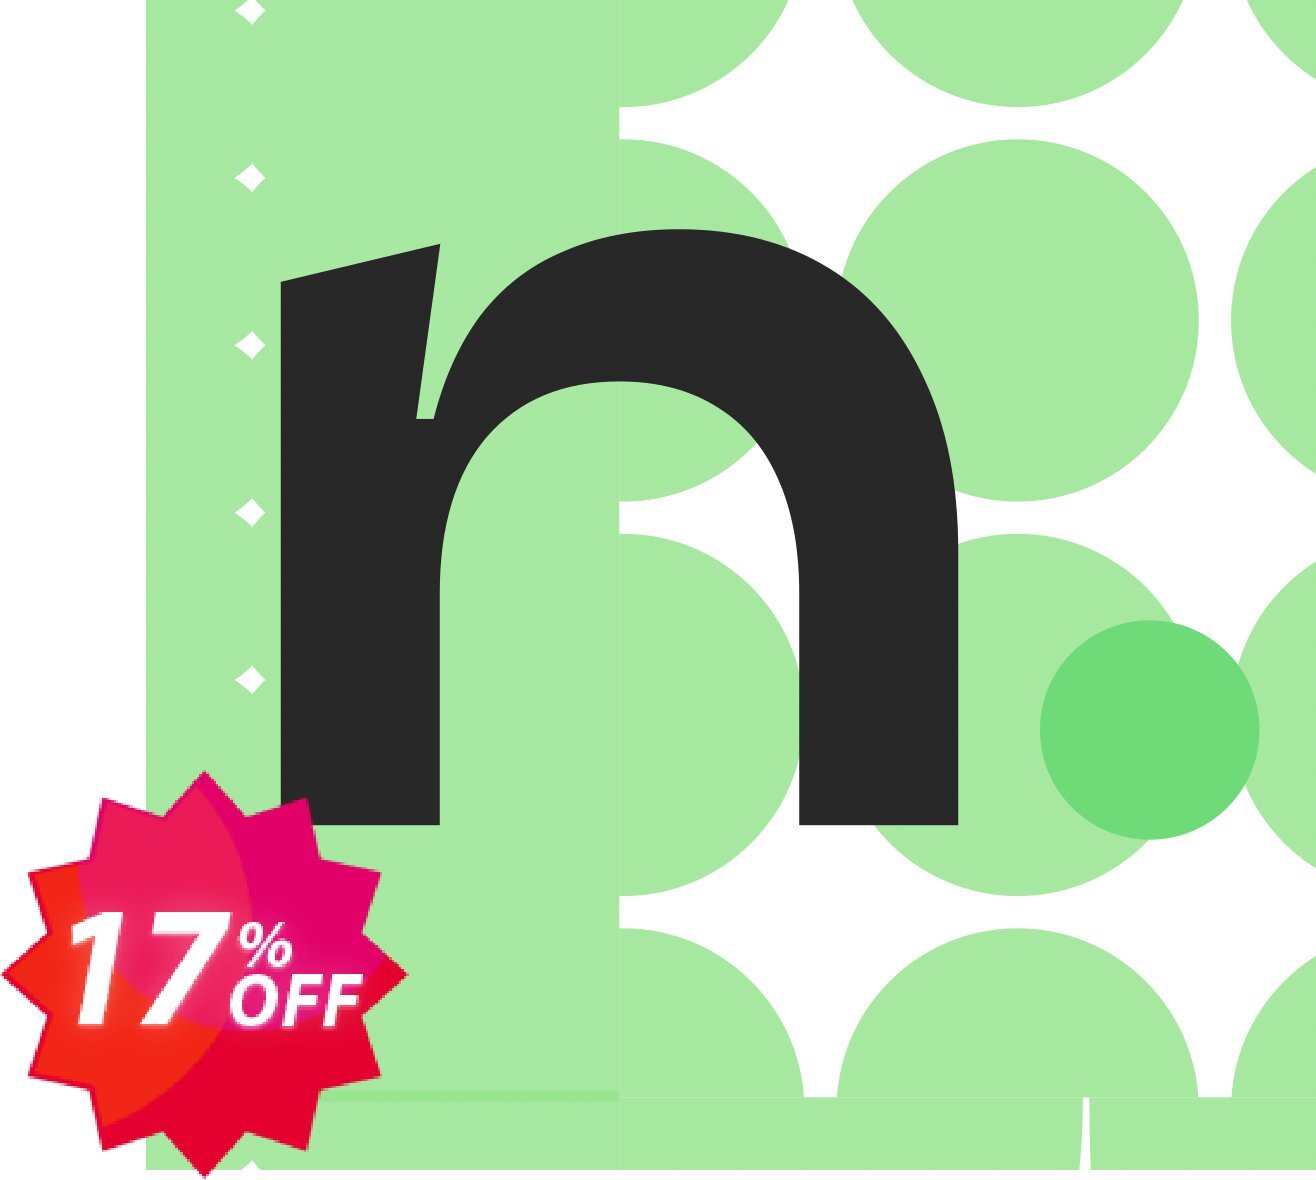 Name.com Domains for First Order Coupon code 17% discount 